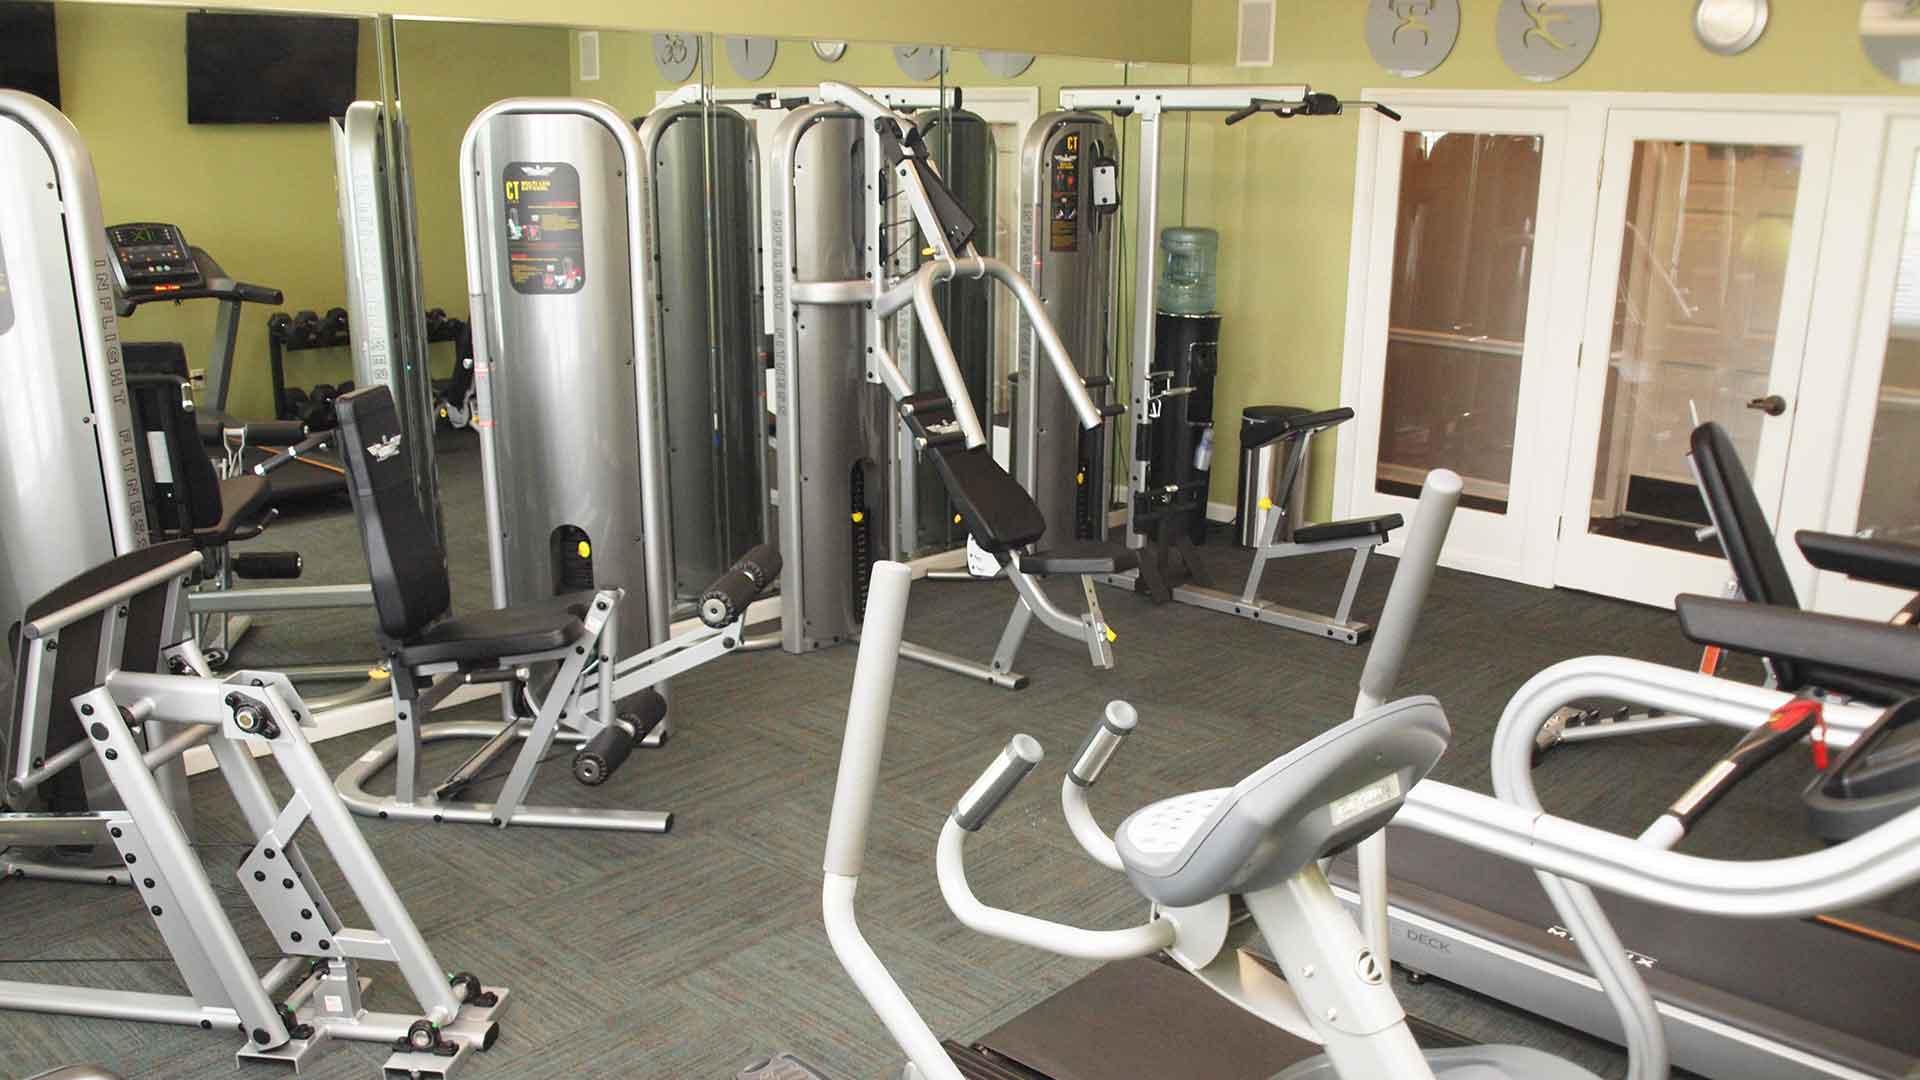 Community fitness center with exercise machines at Emerald Lakes.